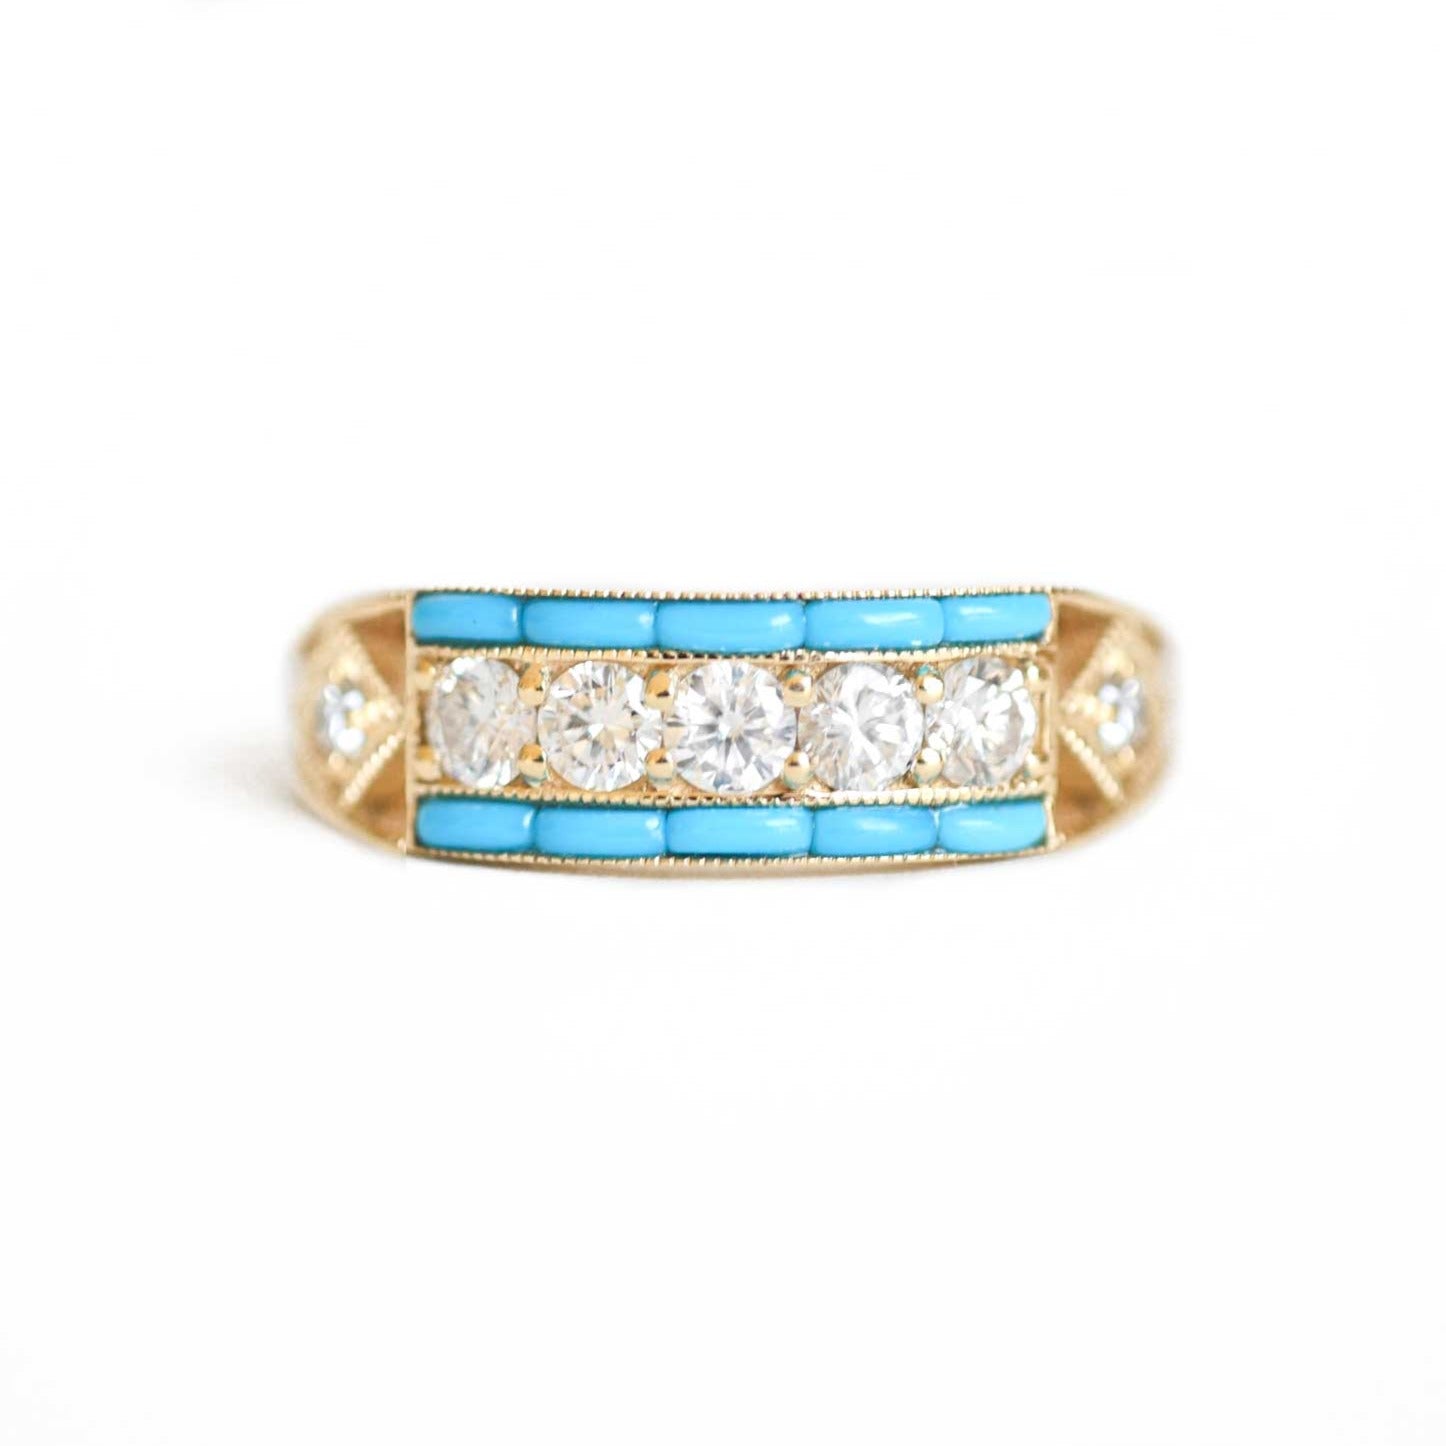 Art Deco Five Diamond Ring with Turquoise